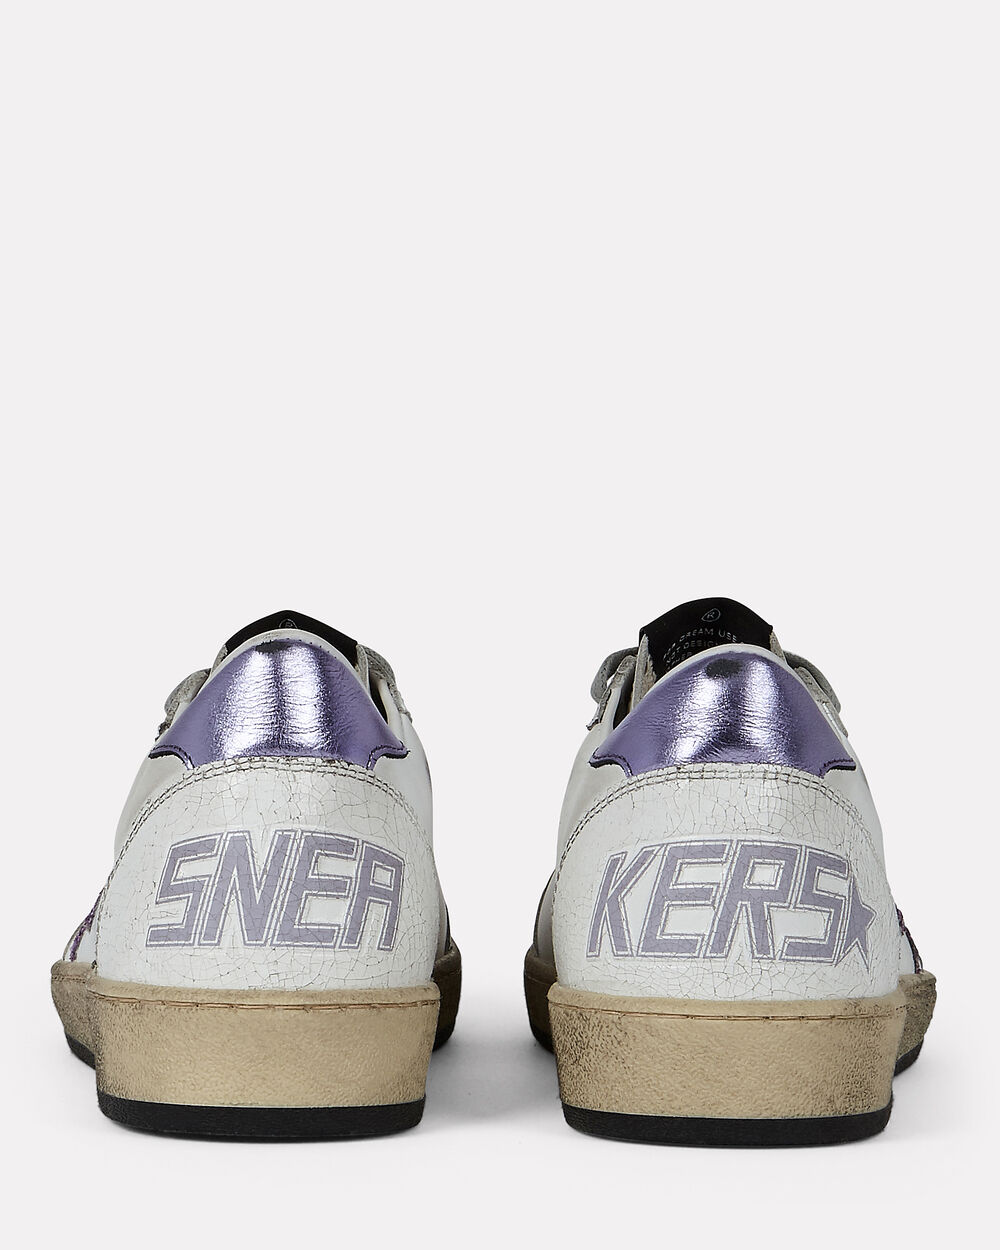 Golden Goose Ball Star Leather Sneakers | INTERMIX®